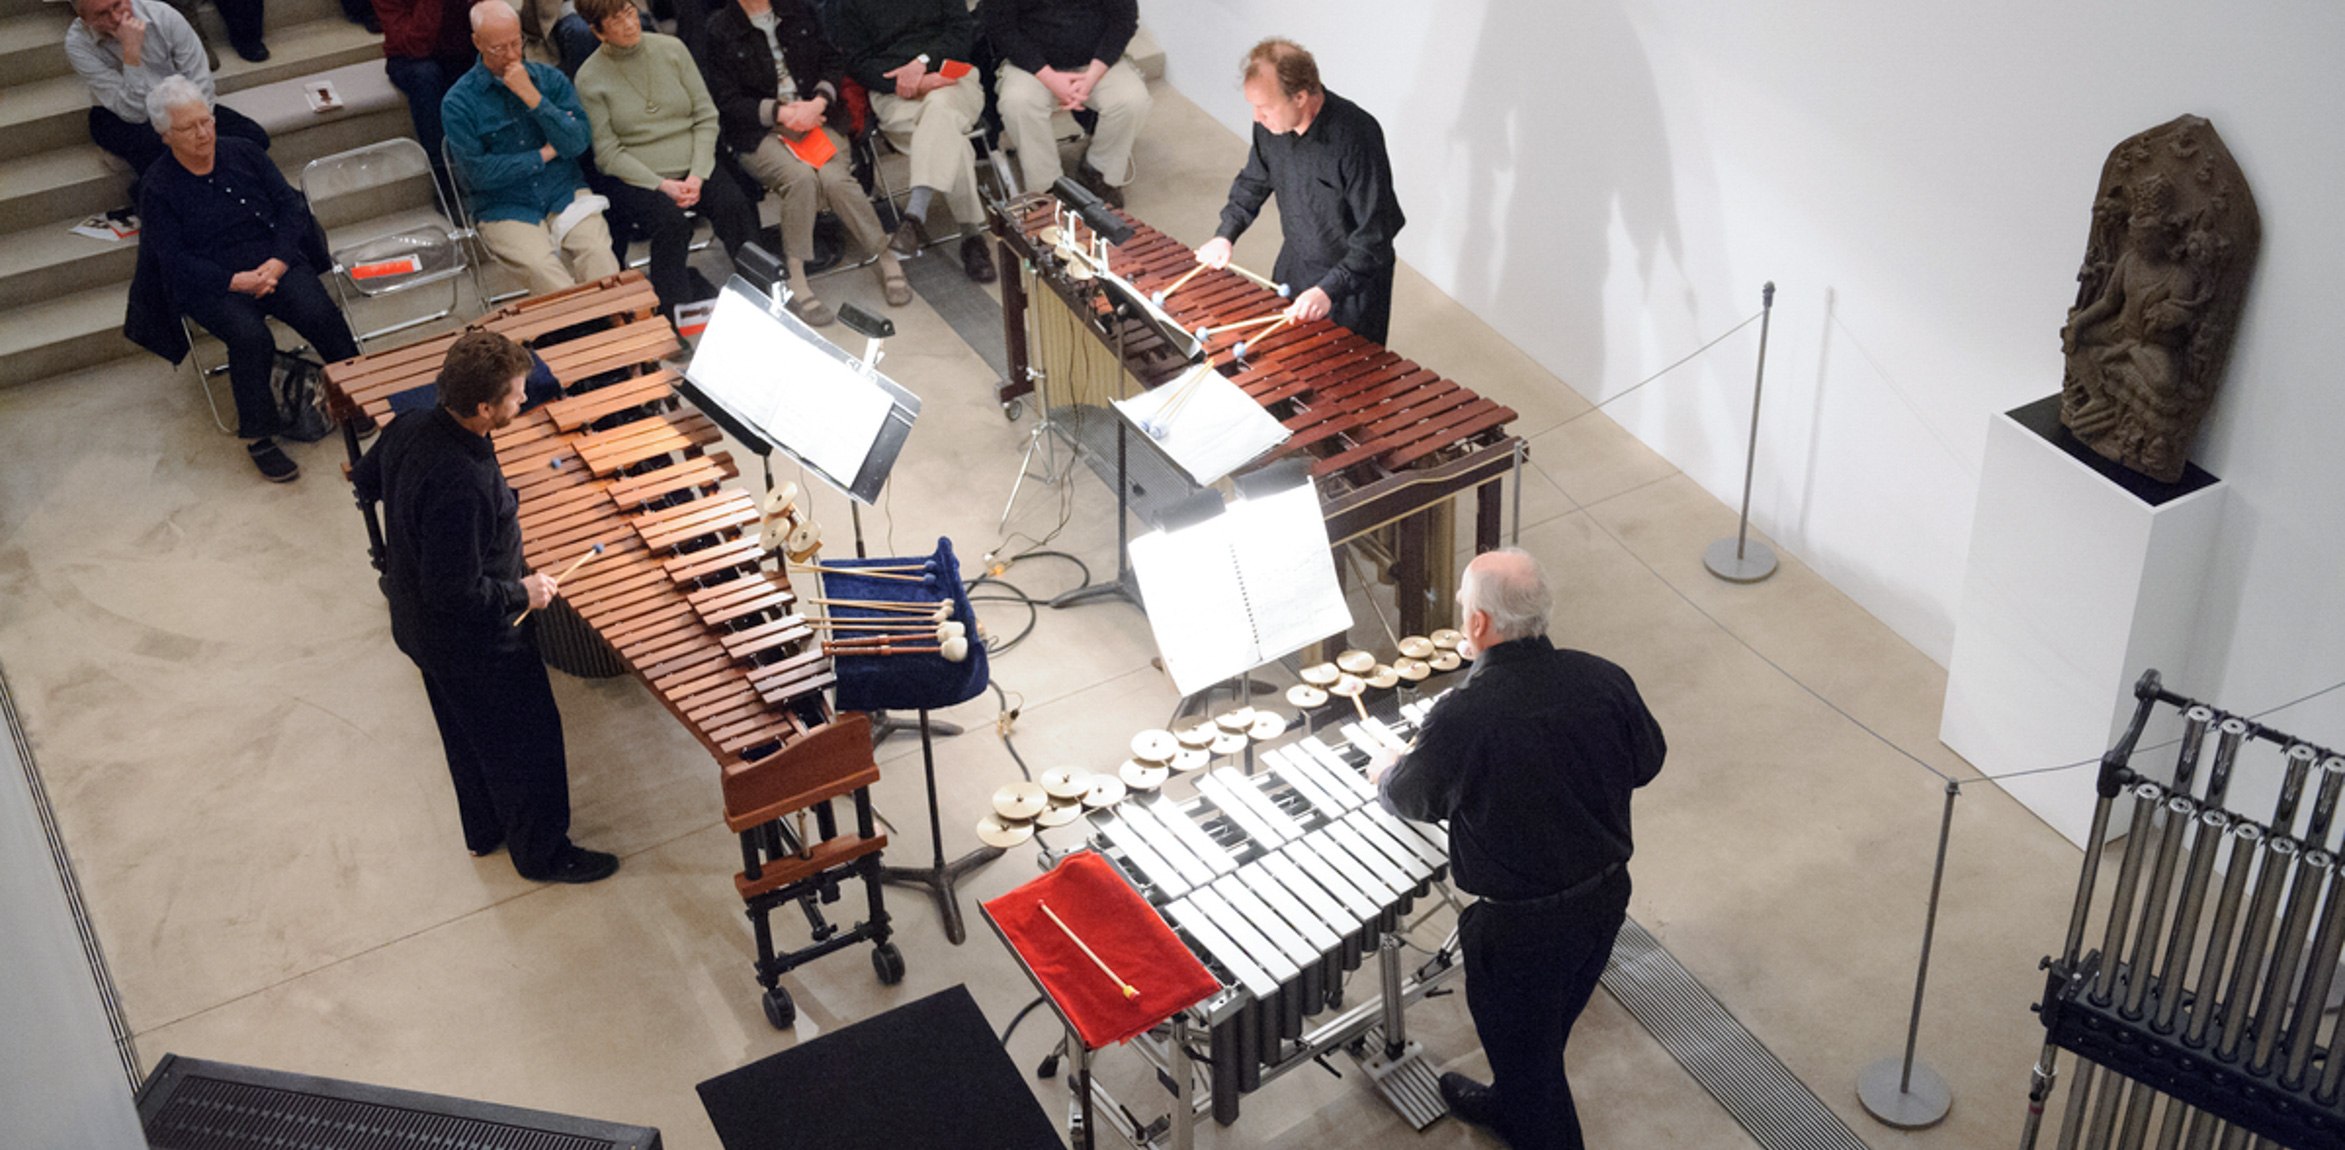 Three glockenspiel players perform for an audience in the Lower Main Gallery.